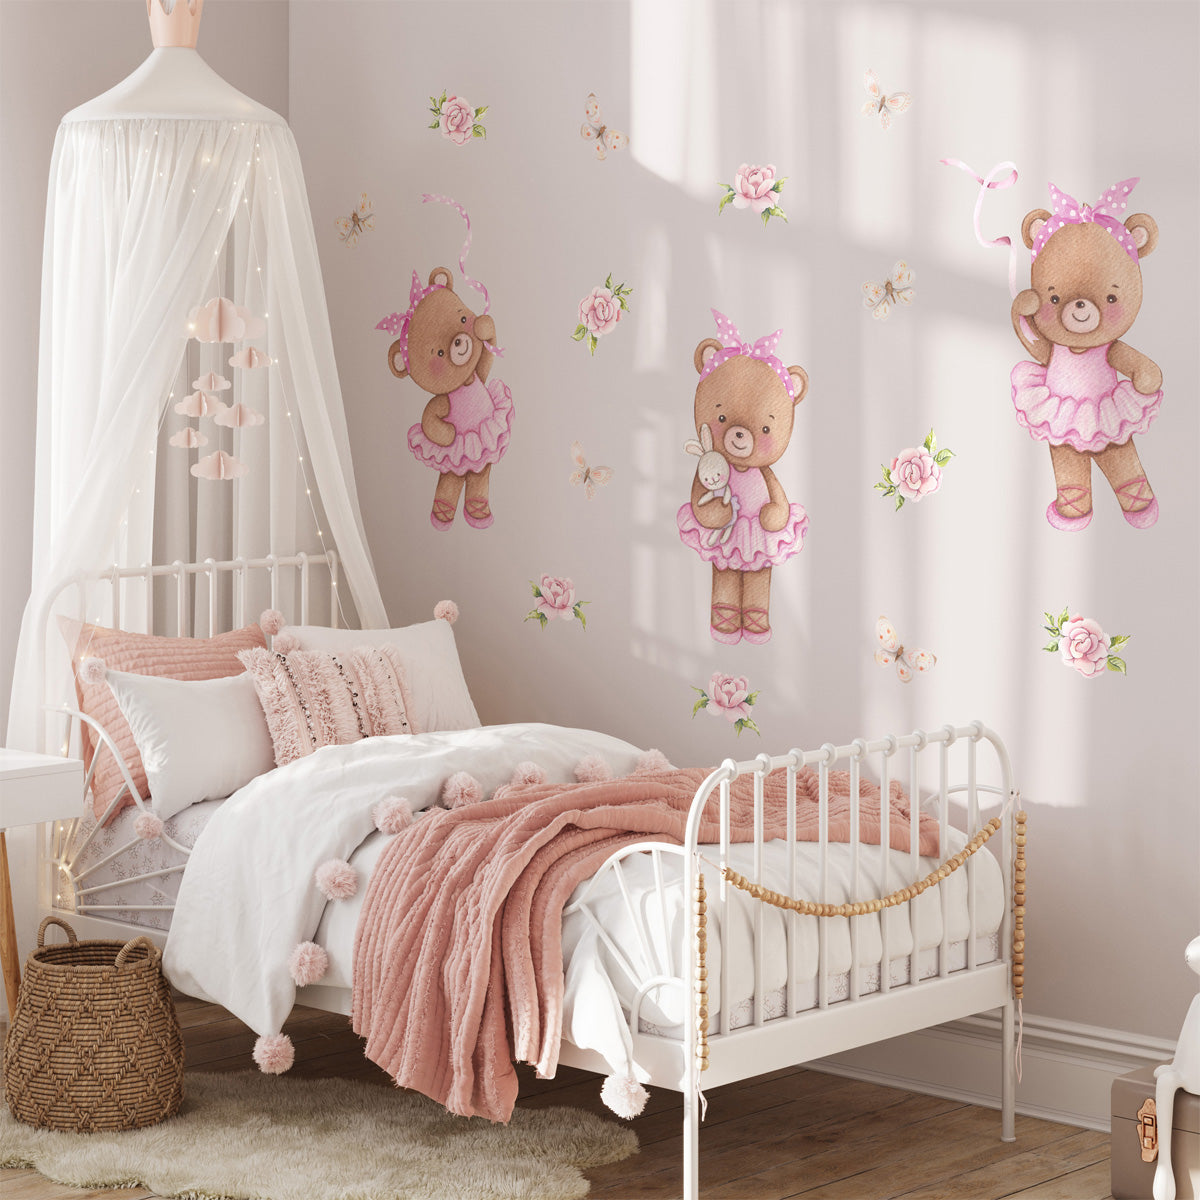 Wall Stickers for Baby Room Teddy Bears